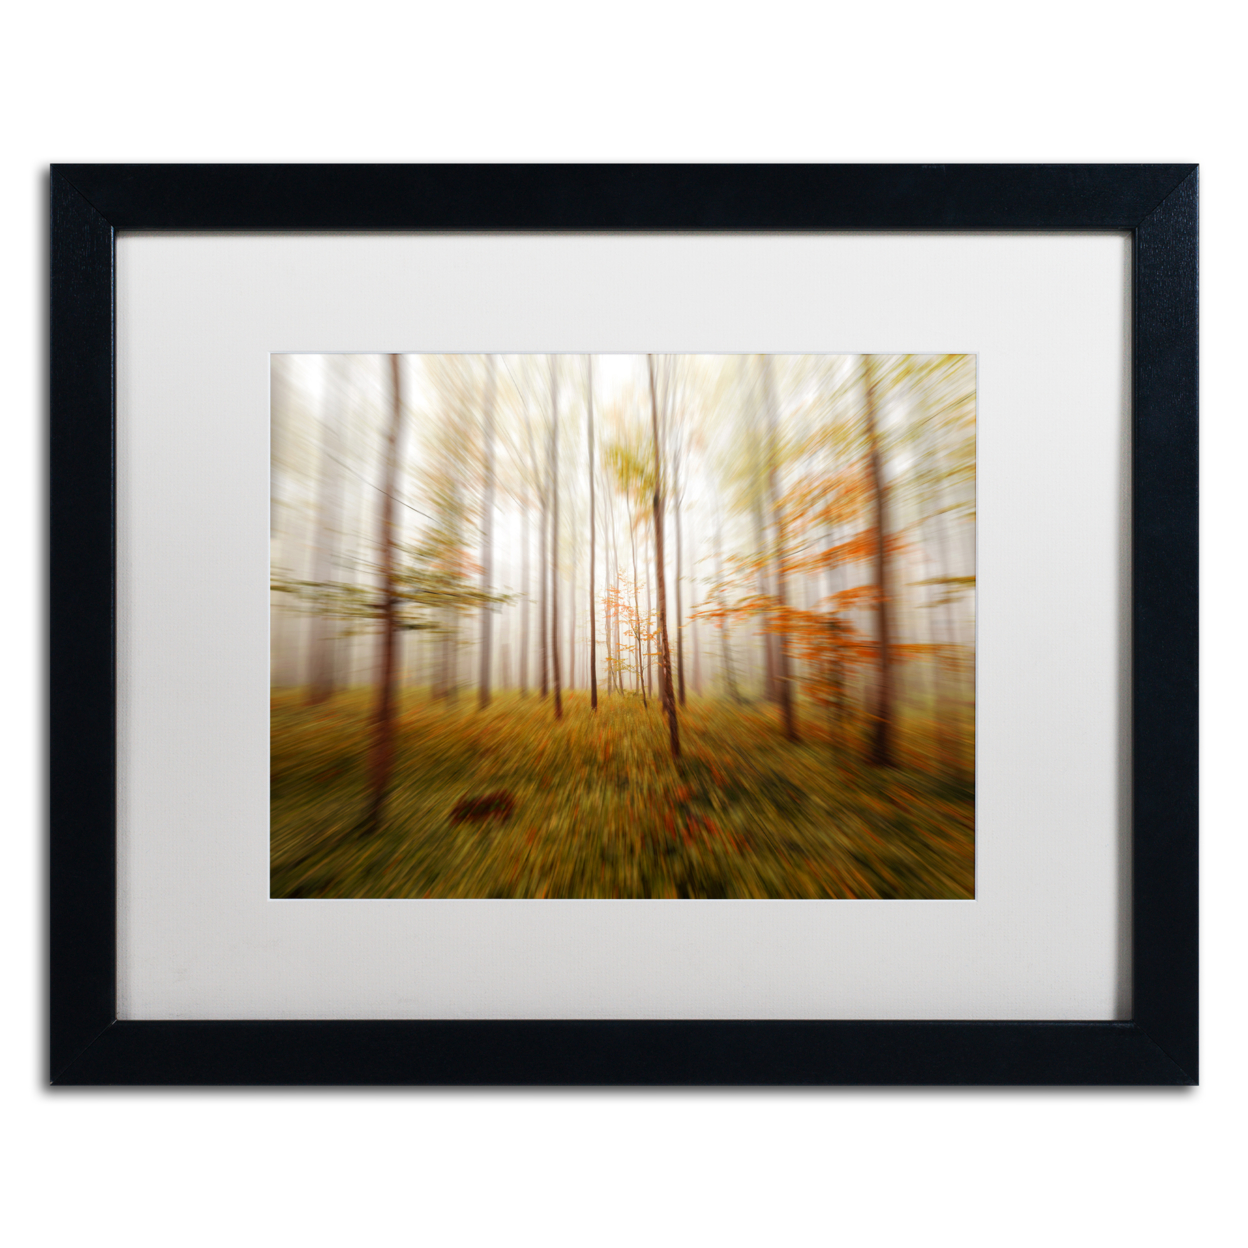 Philippe Sainte-Laudy 'Autumn Go Fast' Black Wooden Framed Art 18 X 22 Inches